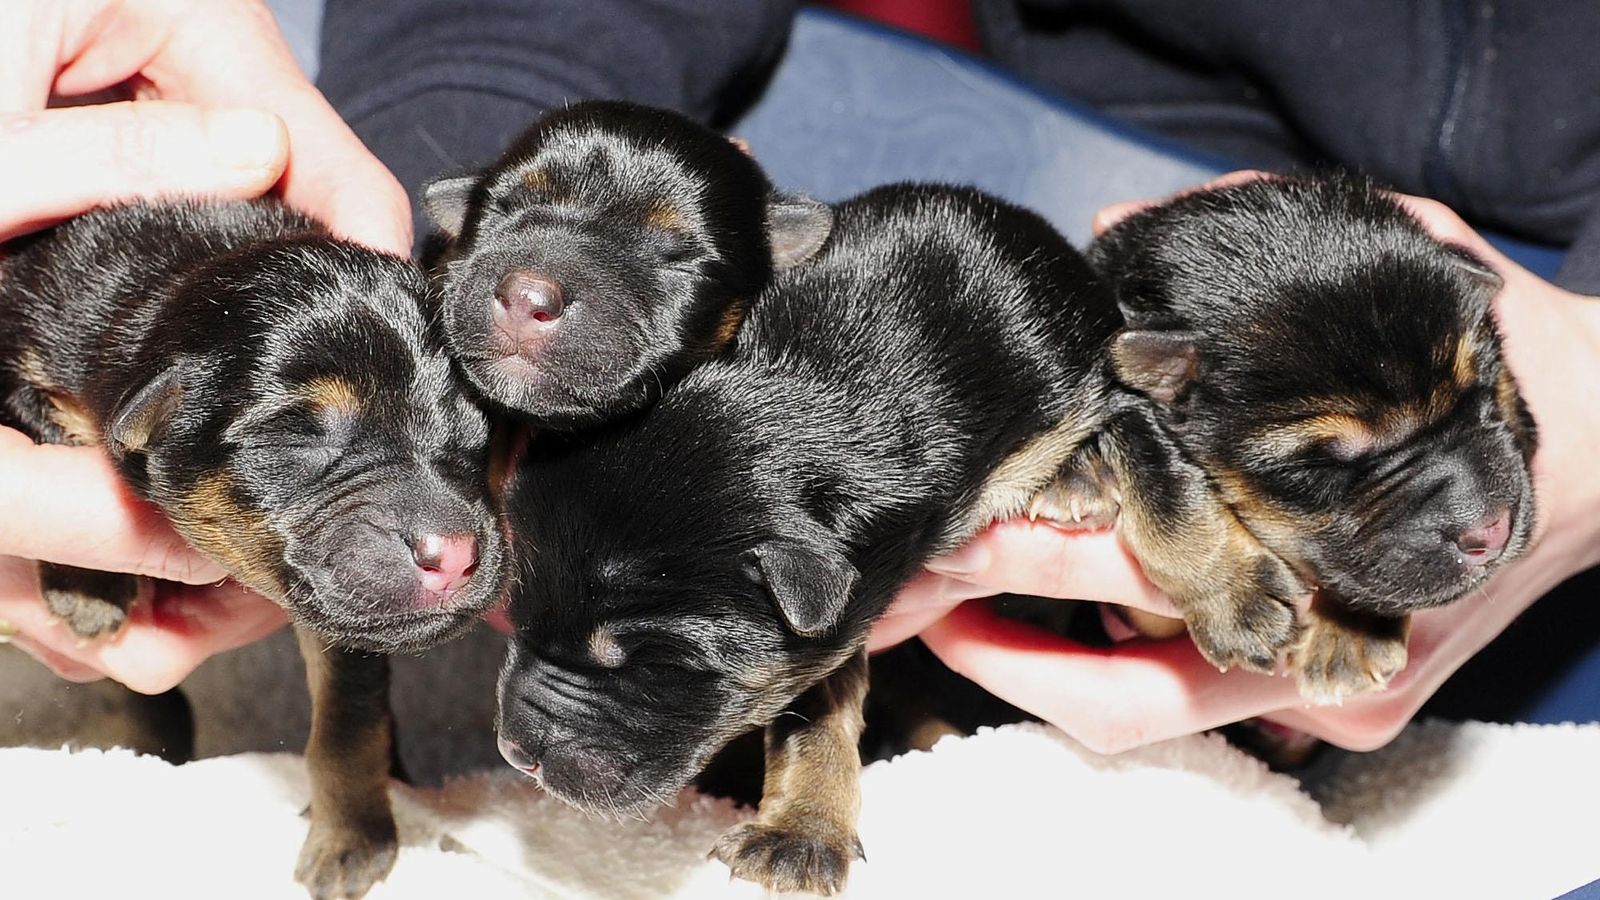 Dogs Trust warns people not to risk buying smuggled puppies this Christmas